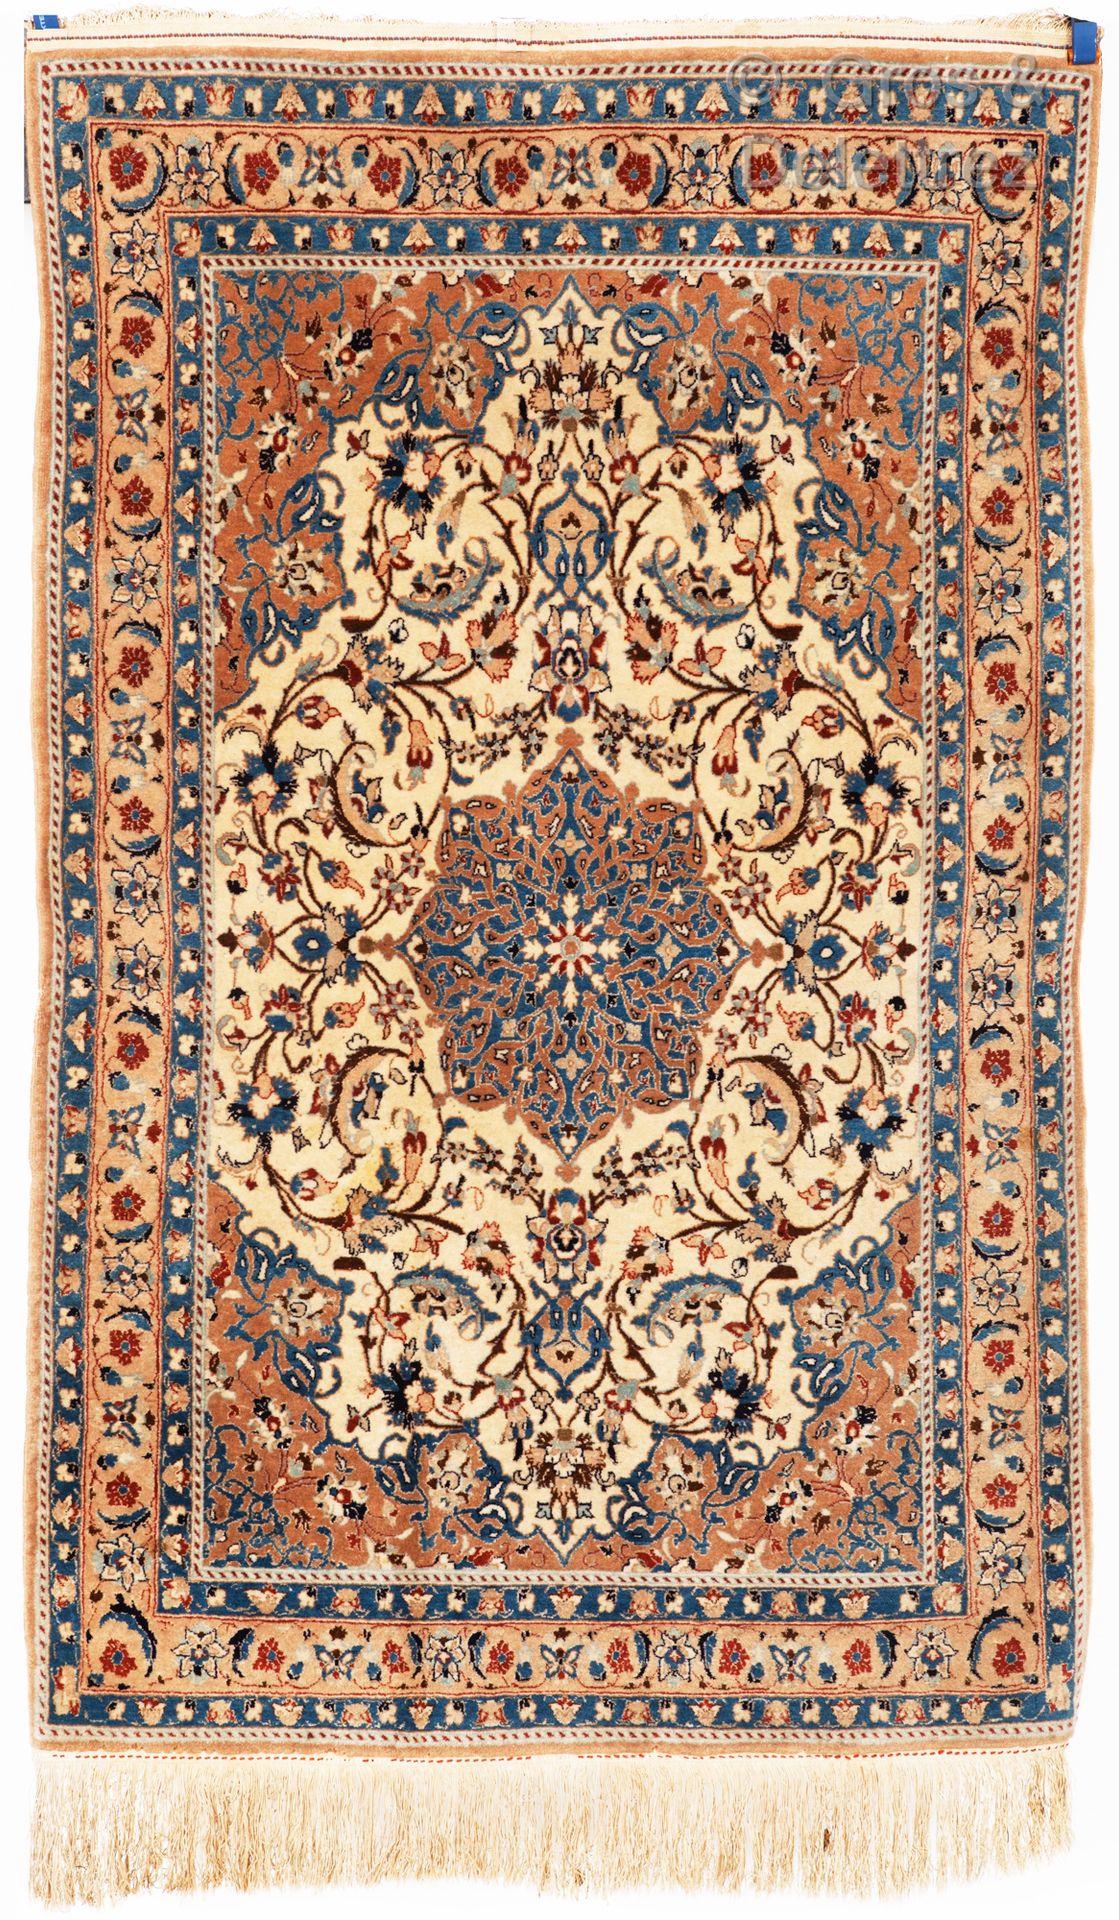 Null Isfahan rug in wool and silk, Iran

Isfahan rug in wool with highlights of &hellip;